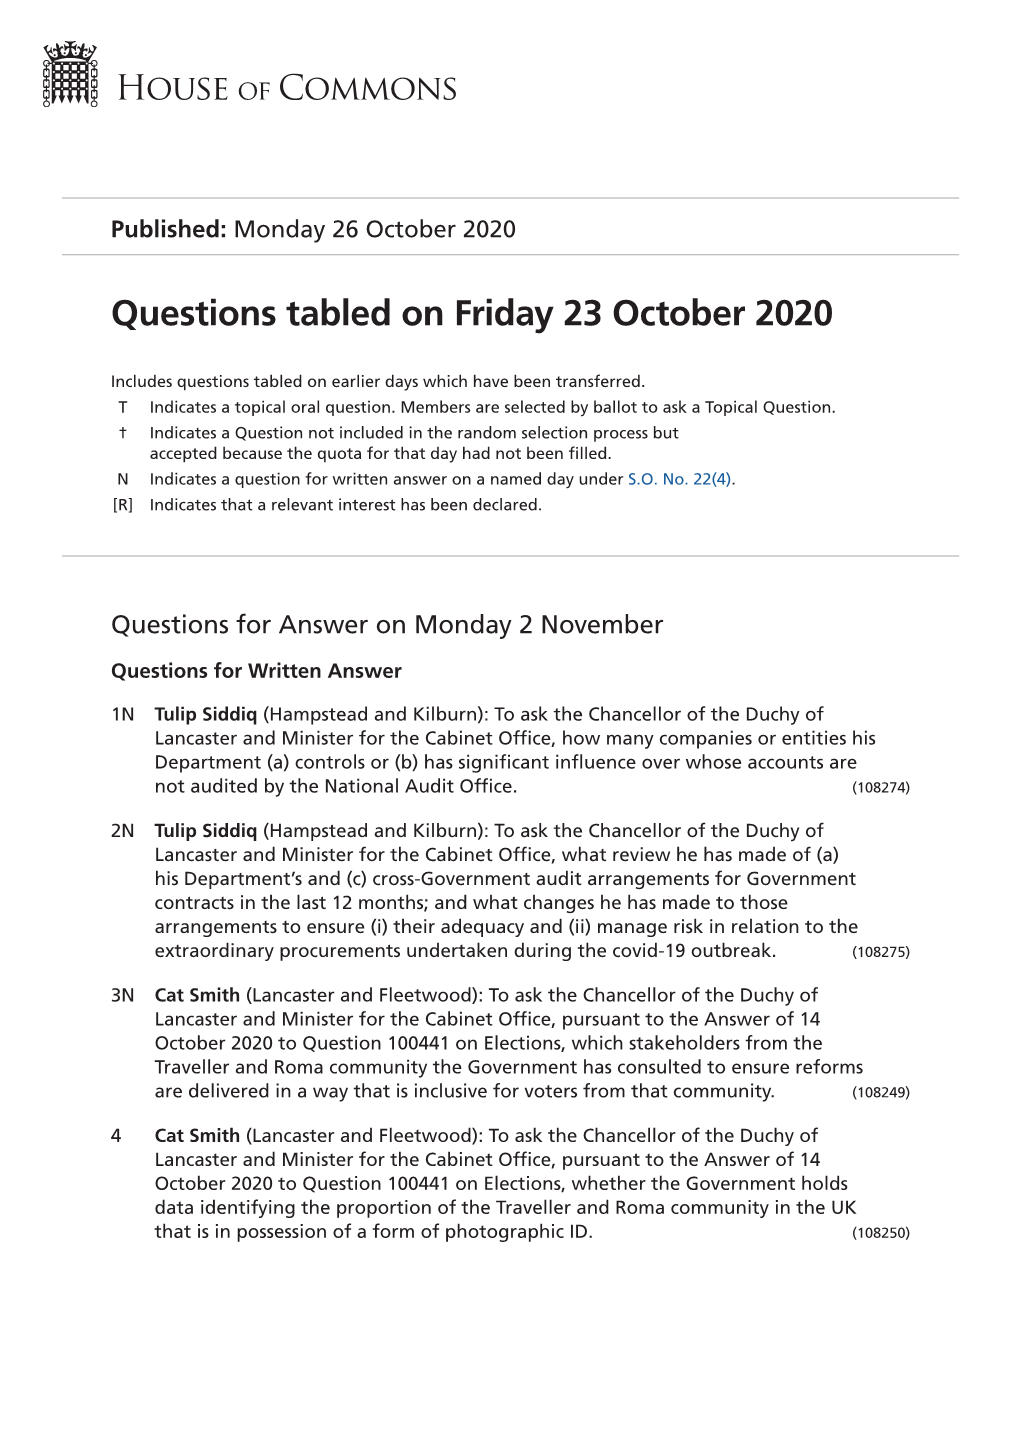 Questions Tabled on Friday 23 October 2020